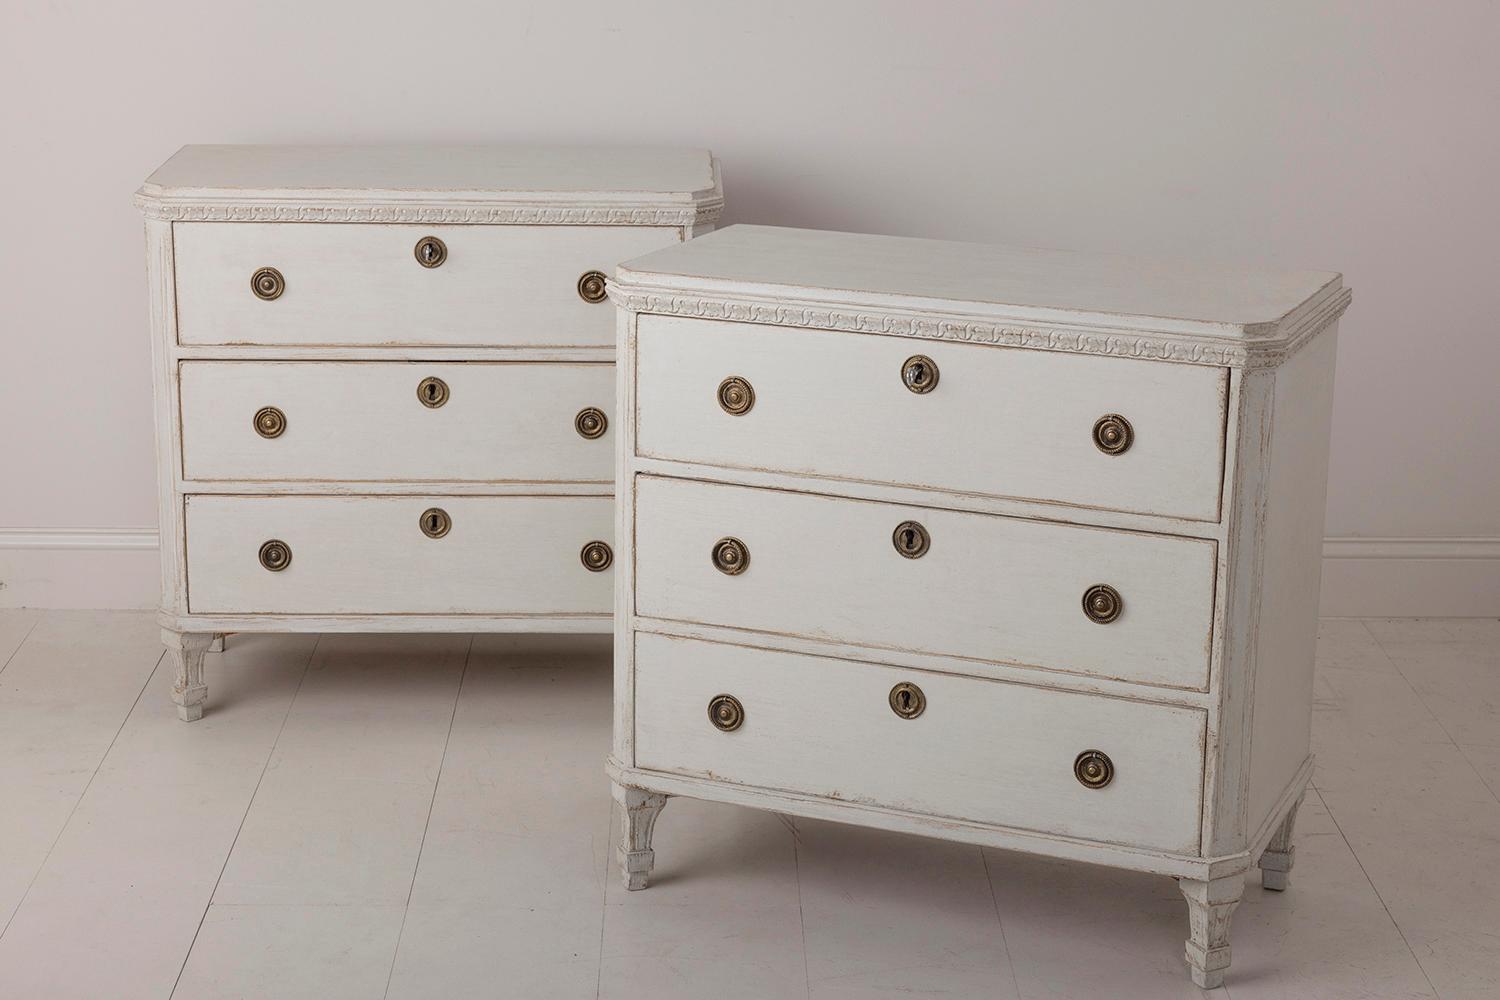 A pair of Swedish commodes in the Gustavian style with carved foliate detail around the tops. Chalky ivory paint. Three large drawers, brass hardware, canted and fluted corner posts, and tapered and fluted legs. Original locks with keys.

 